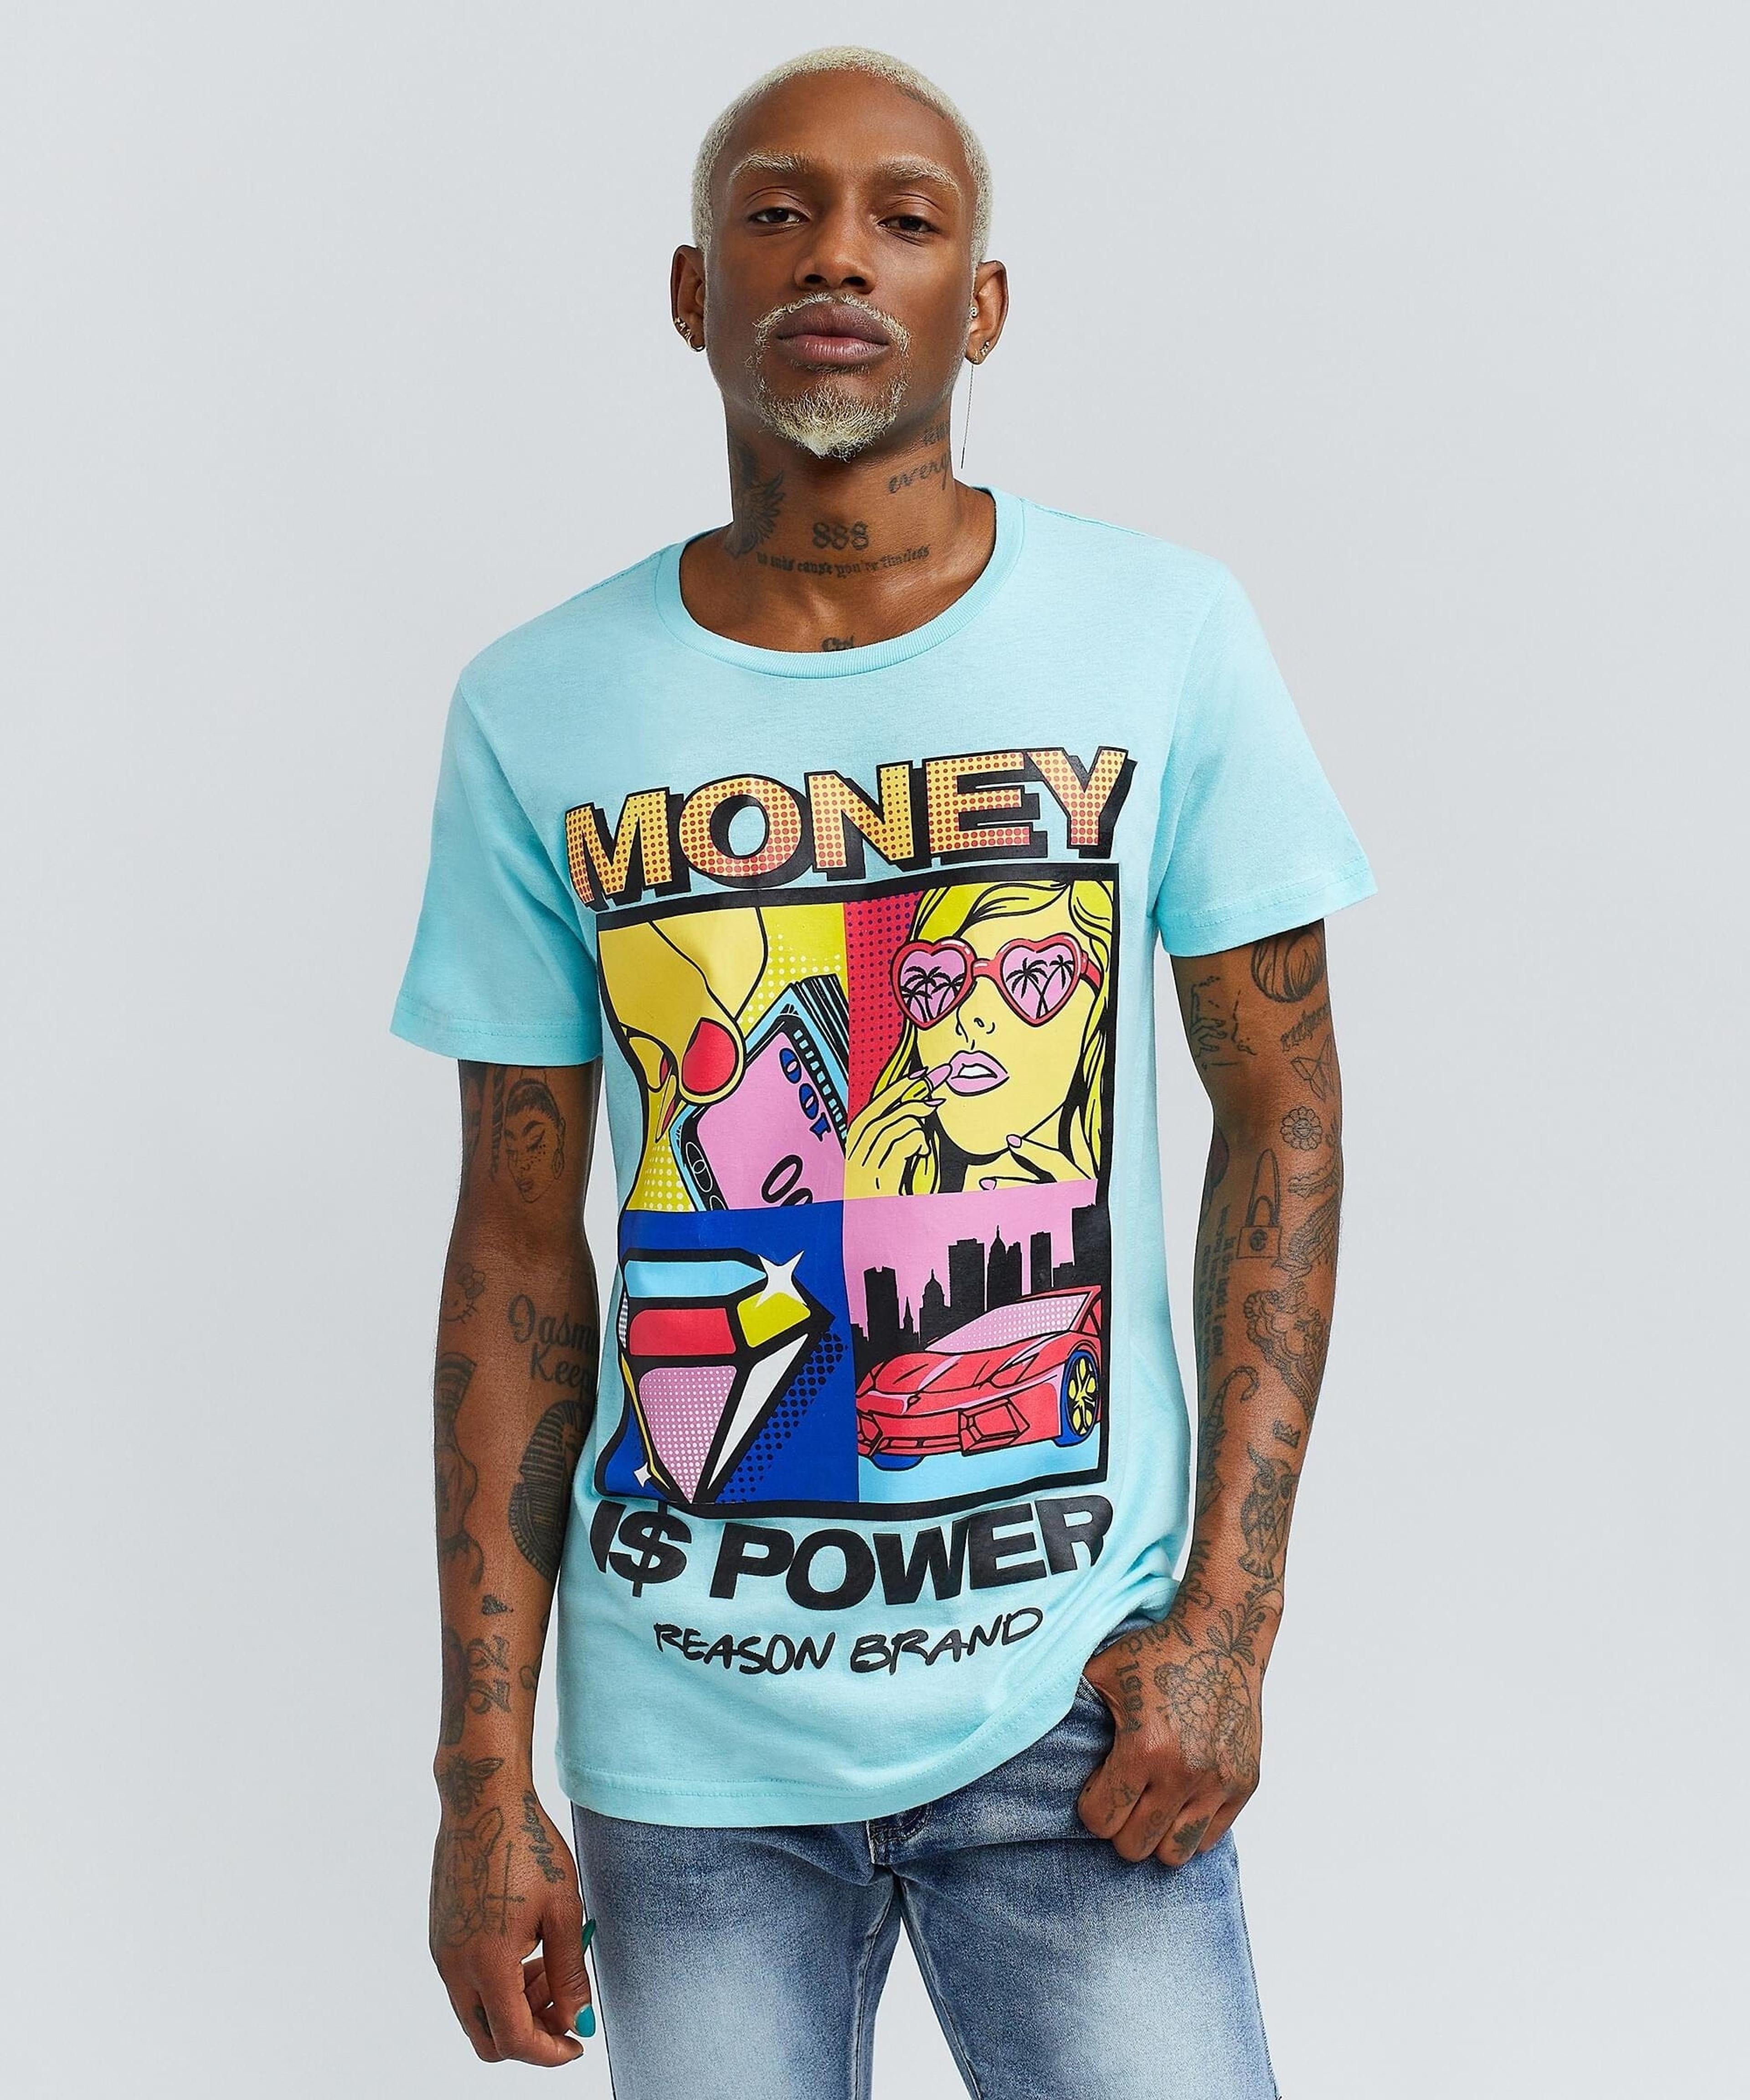 Alternate View 3 of Money Is Power Graphic Tee - Light Blue